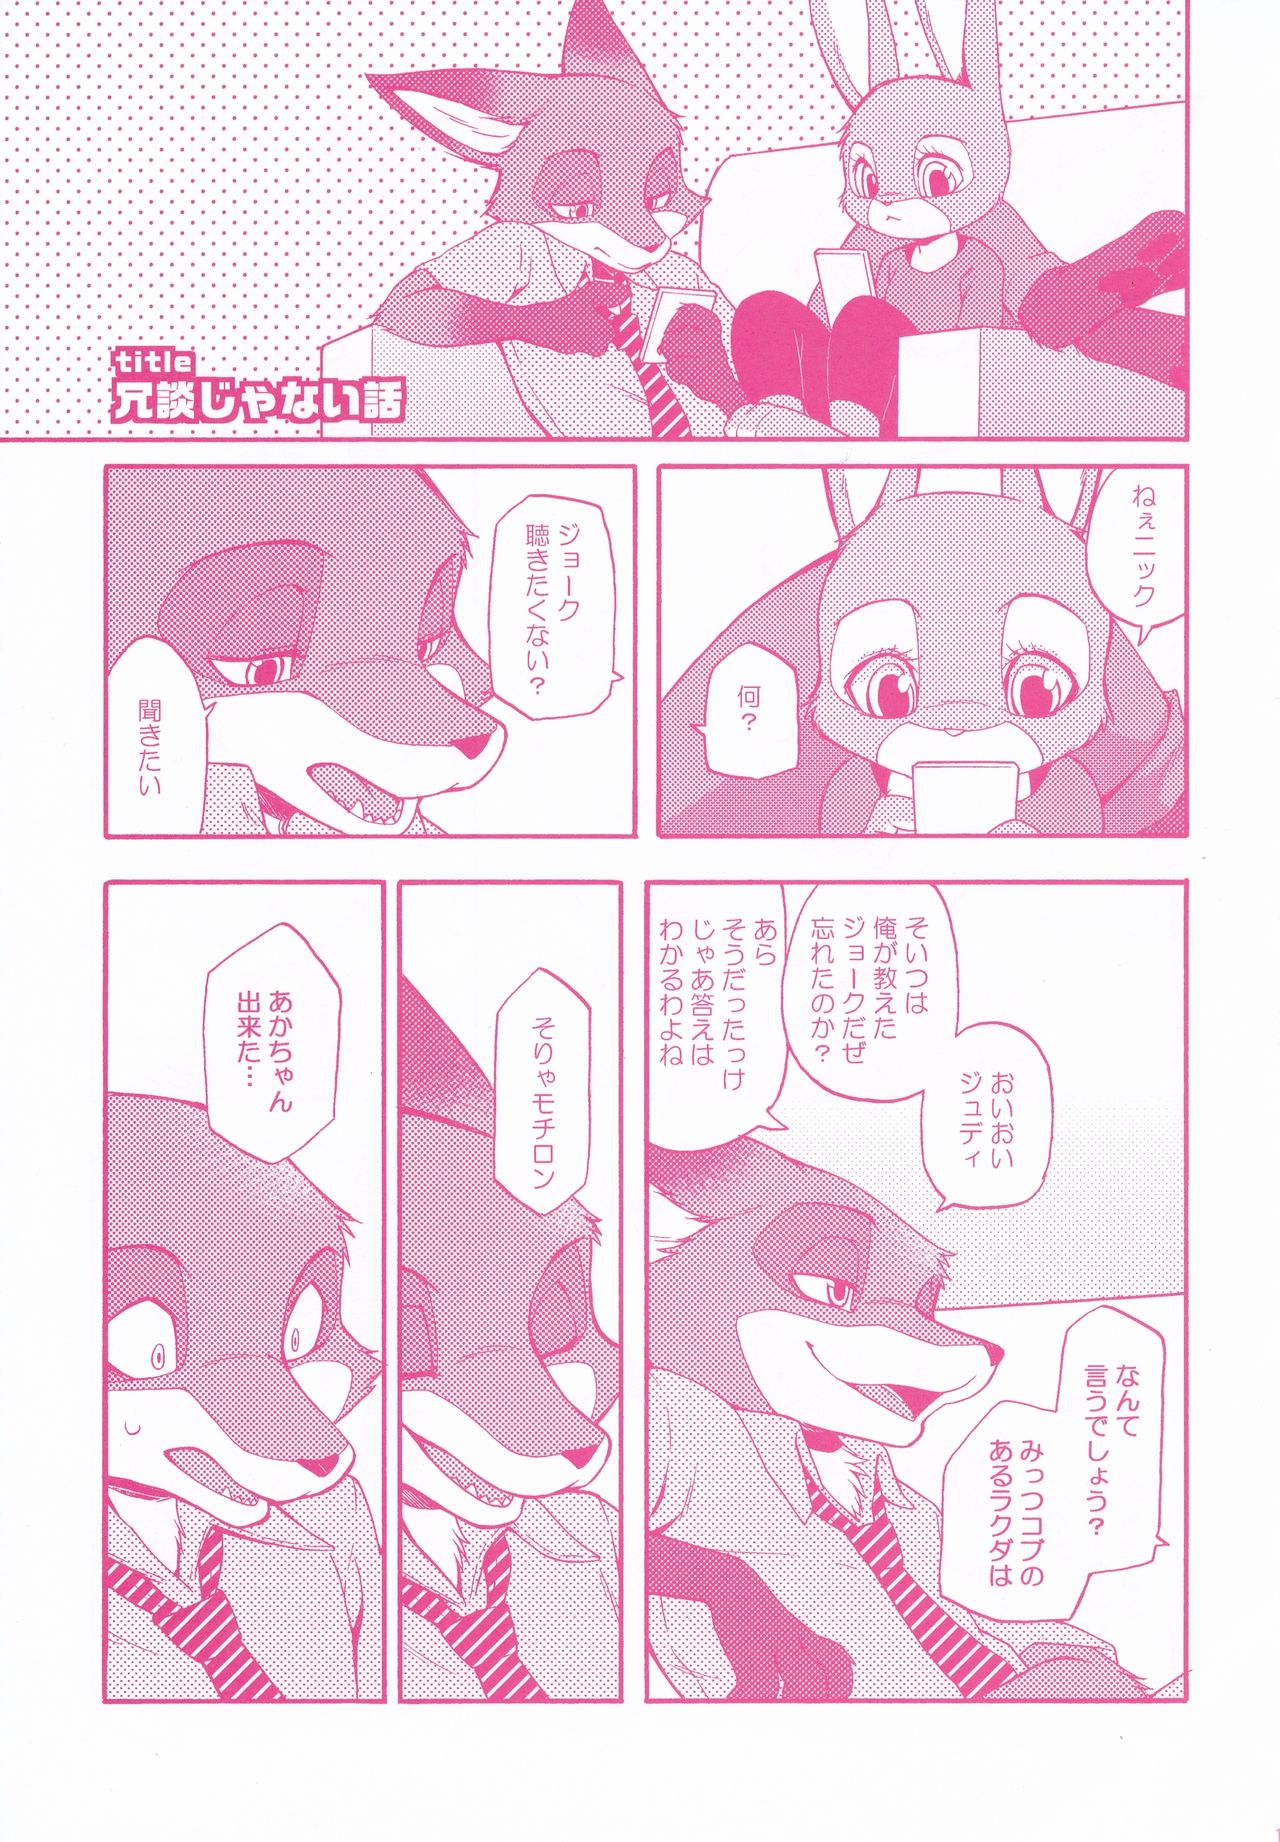 (C90) [Dogear (Inumimi Moeta)] You know you love me? (Zootopia) (C90) [Dogear (犬耳もえ太)] You know you love me? (ズートピア)